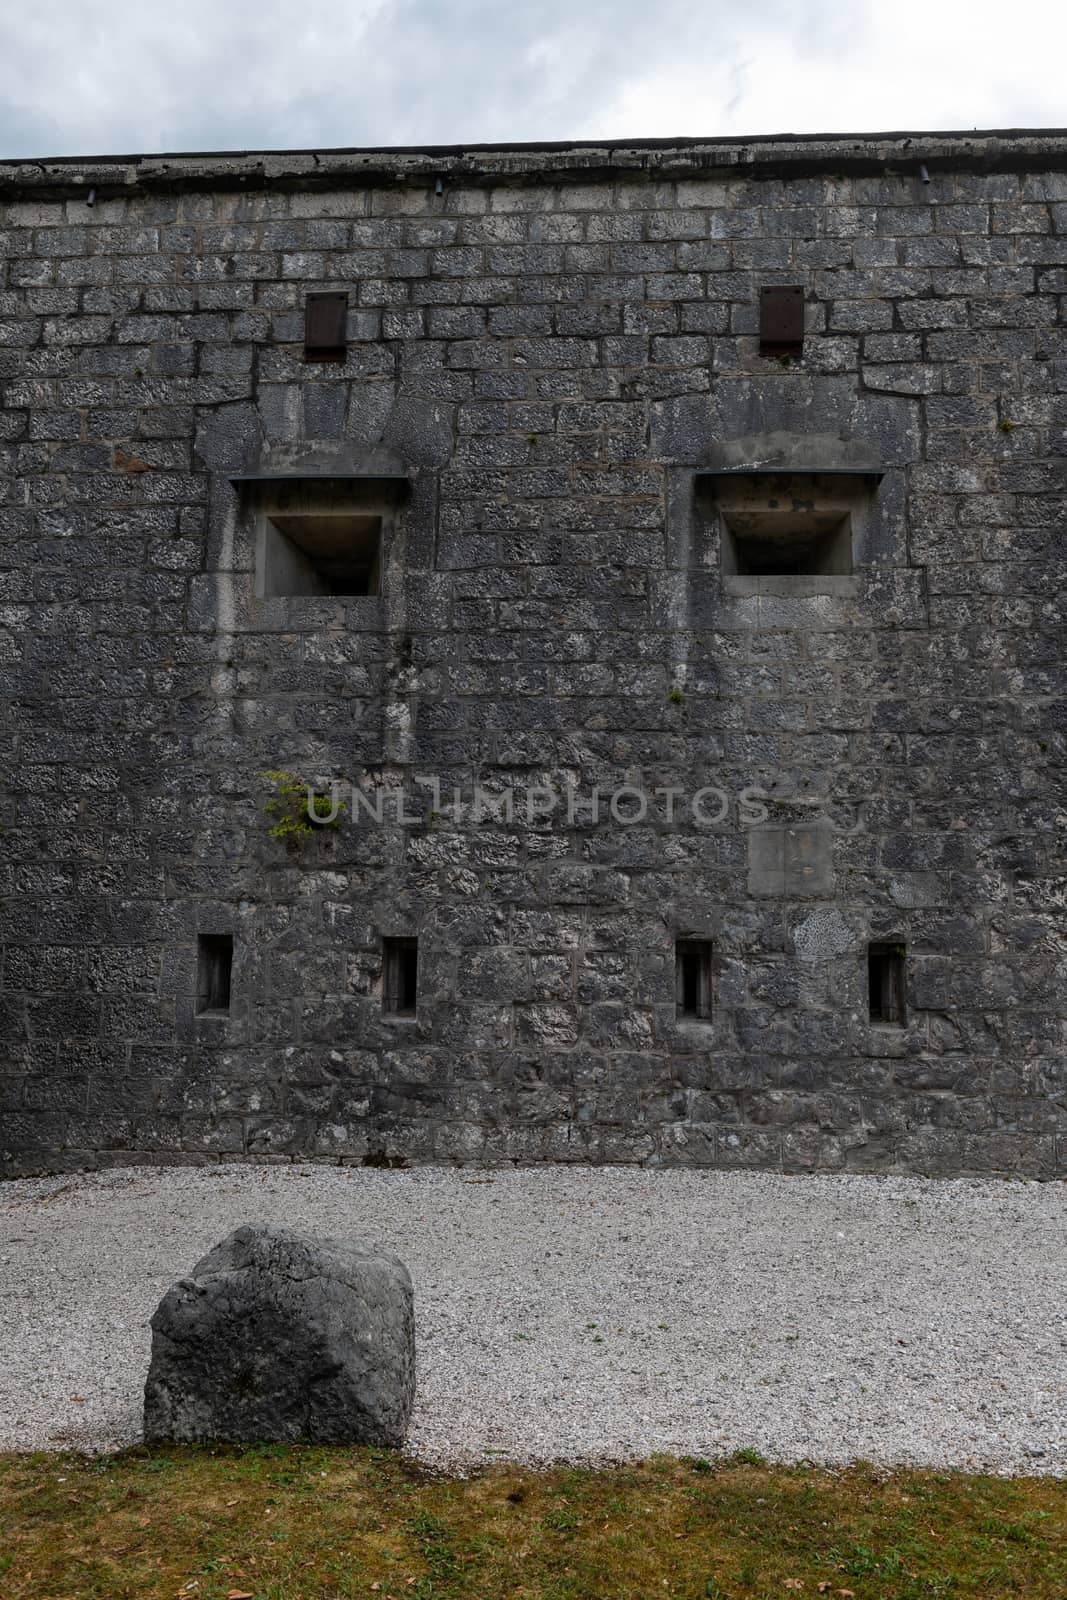 Military fort with stone walls and portholes for riflemen by asafaric